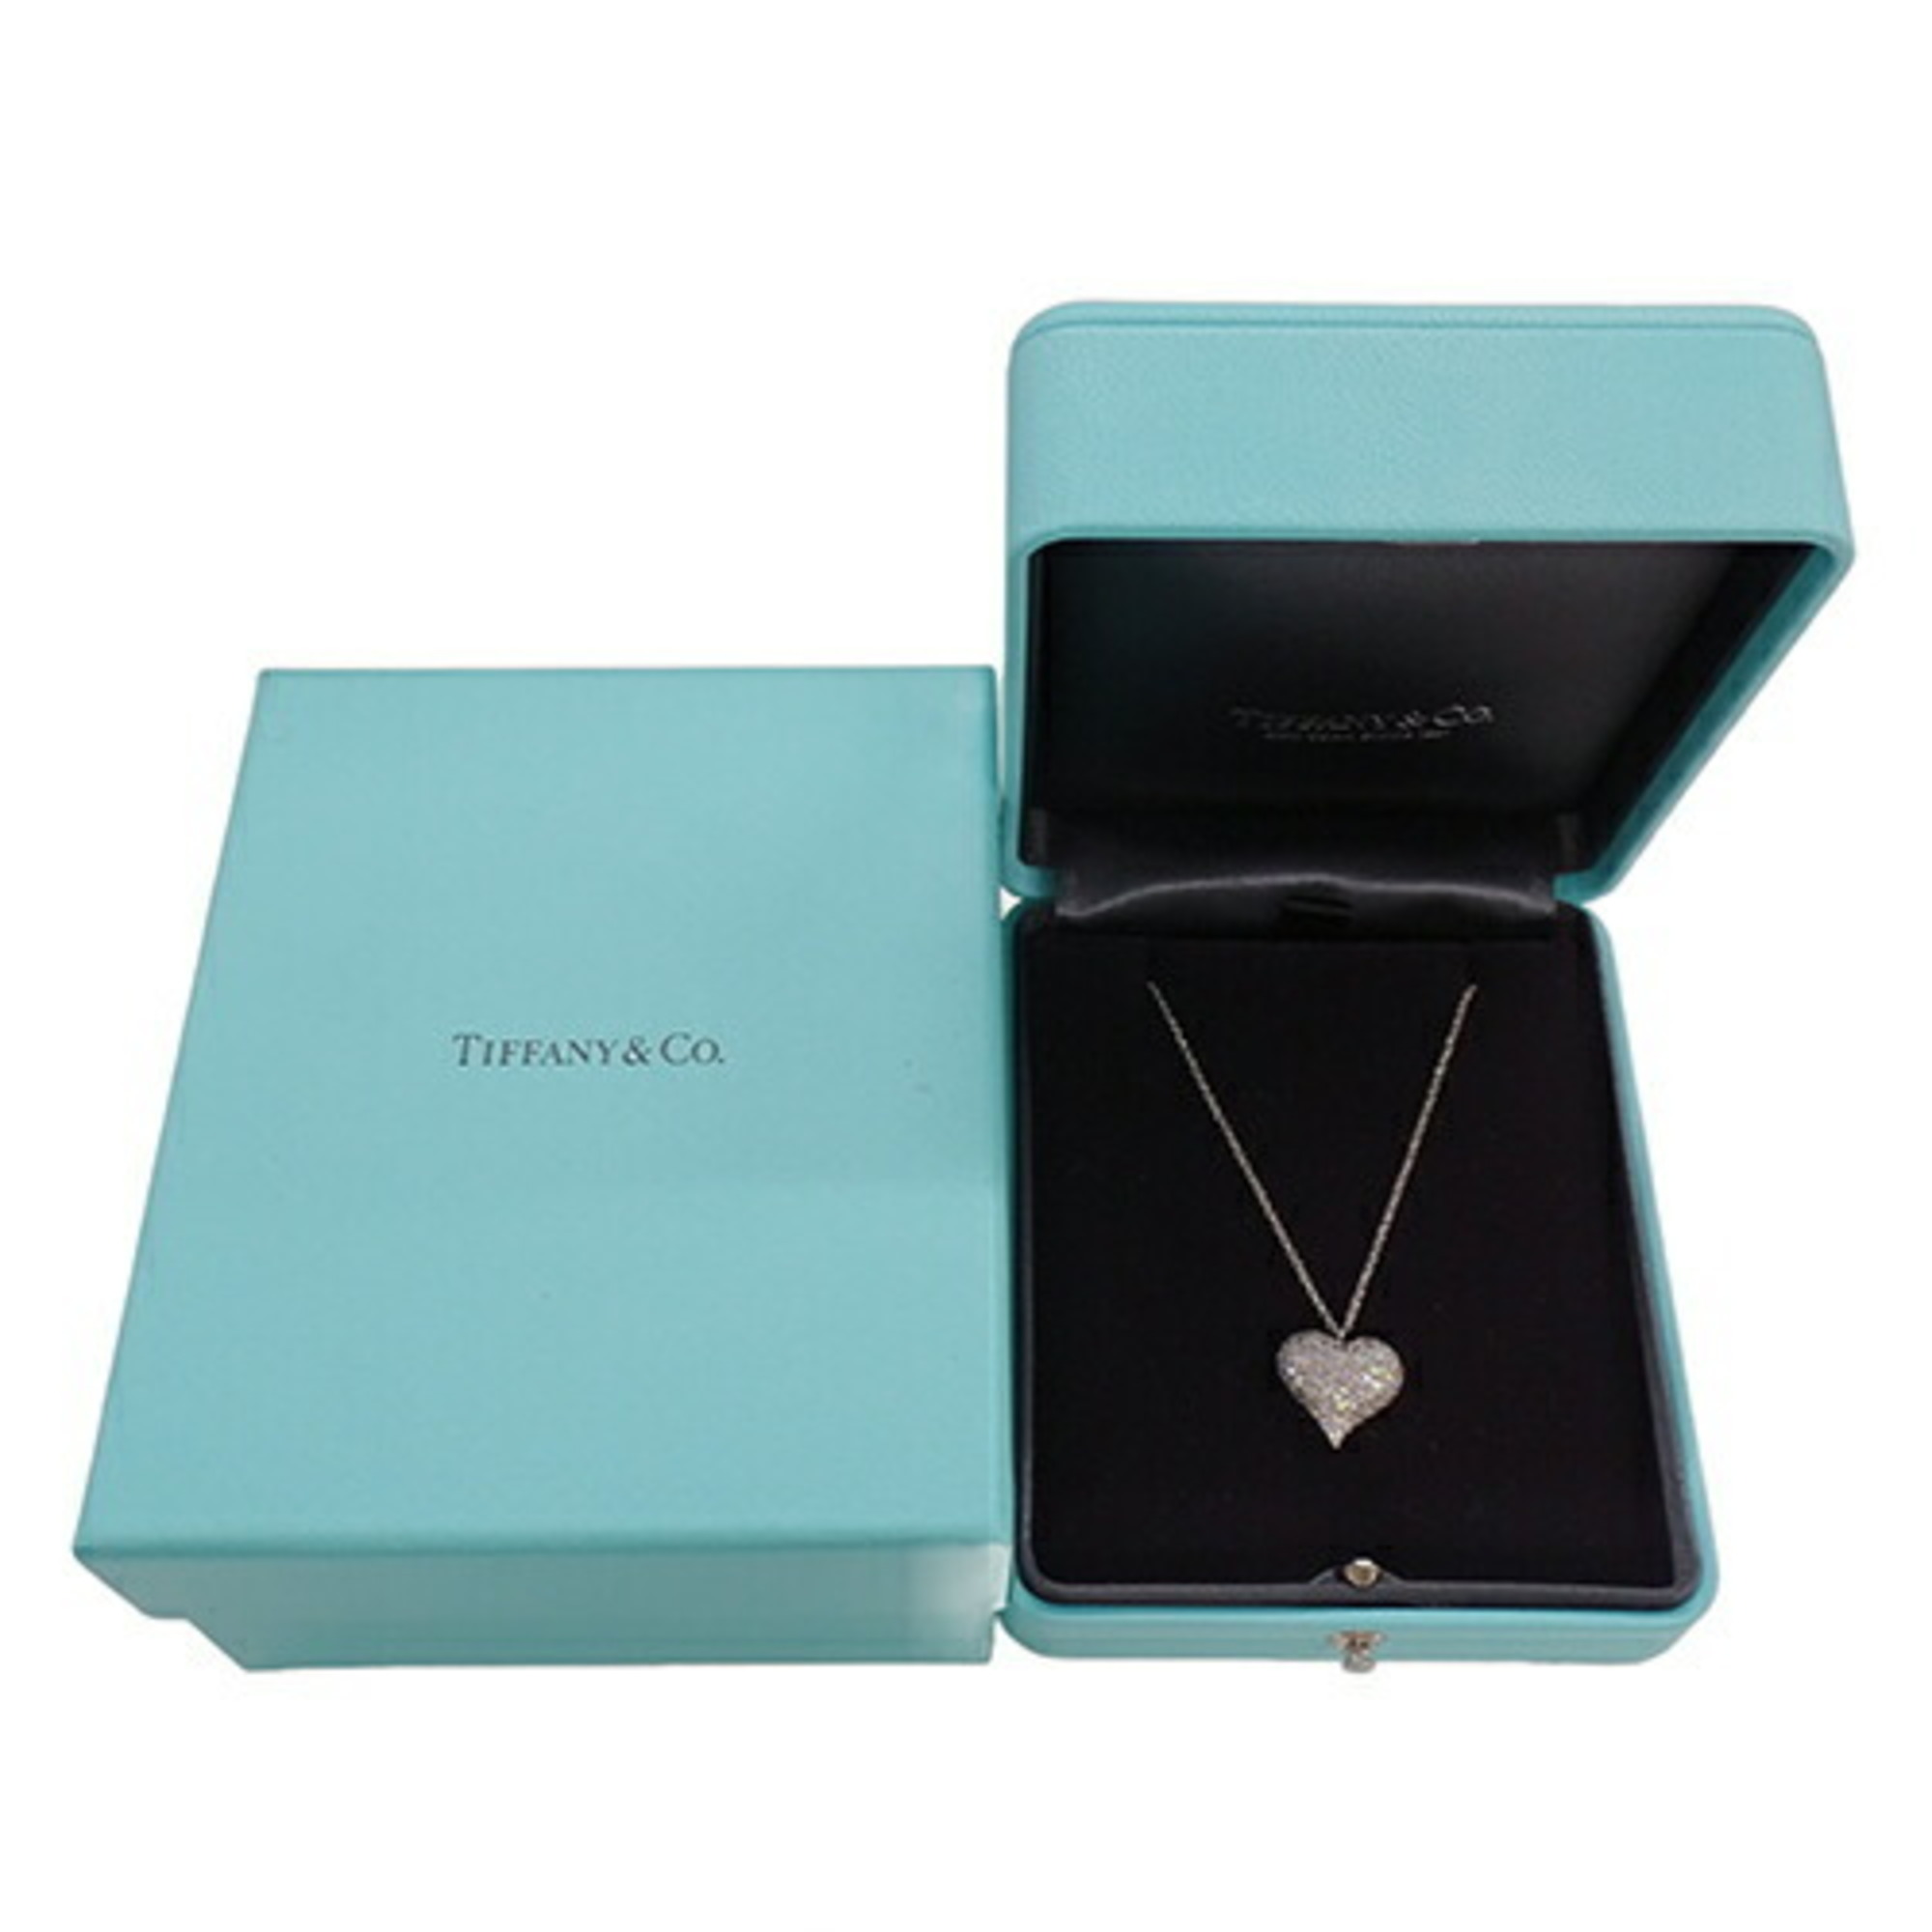 Tiffany & Co. Necklace for women, PT950, diamond, pinched heart, platinum, polished